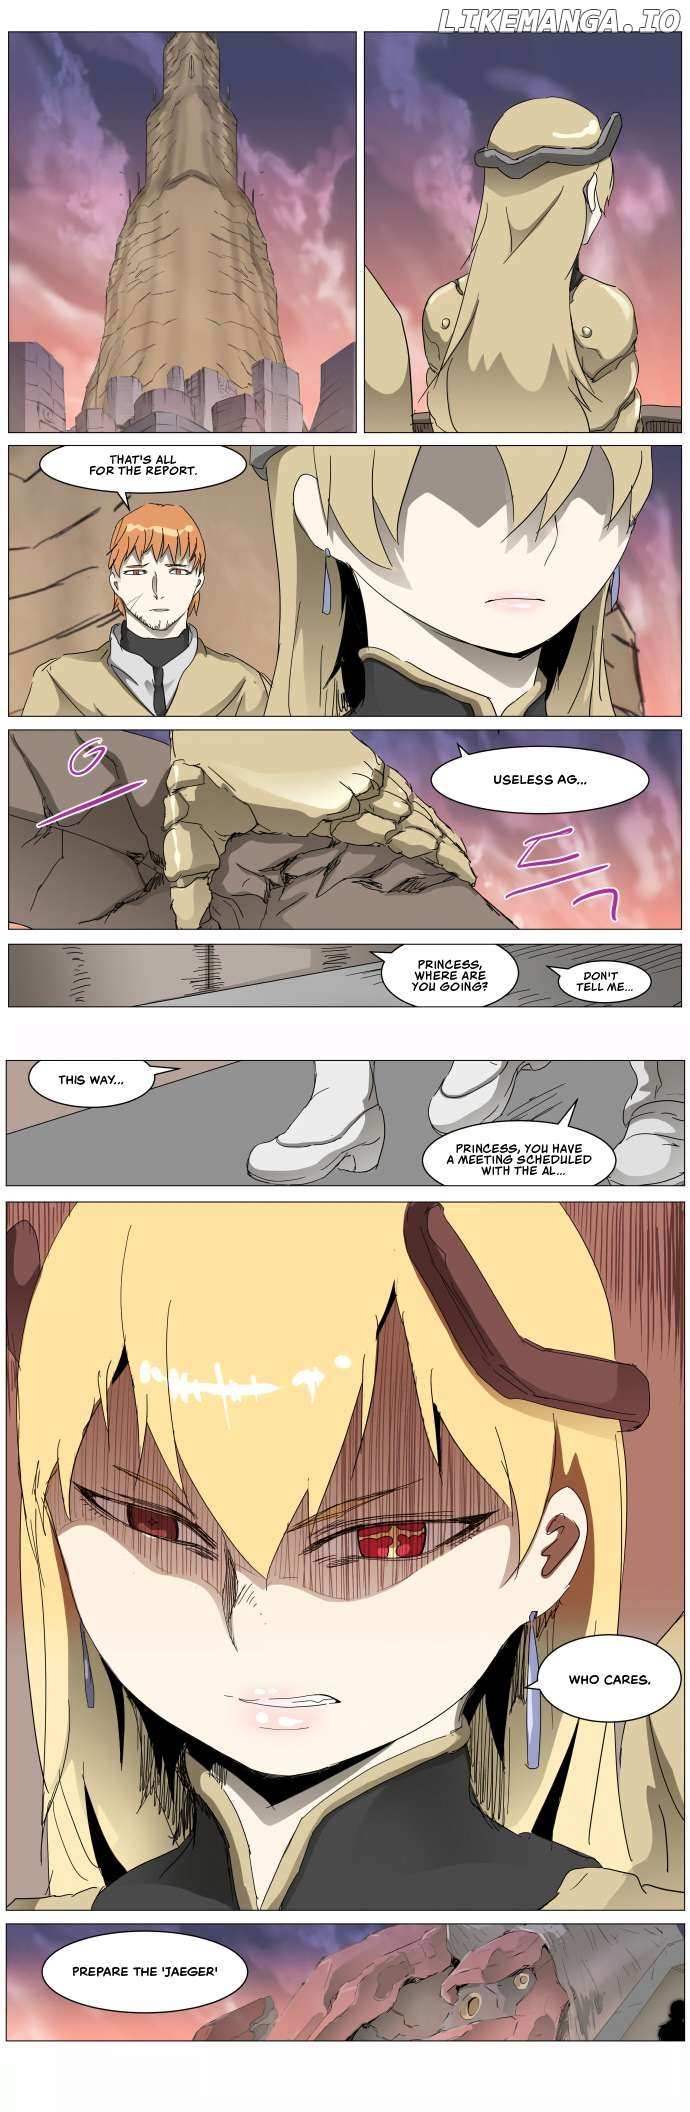 Knight Run Chapter 289 - page 2